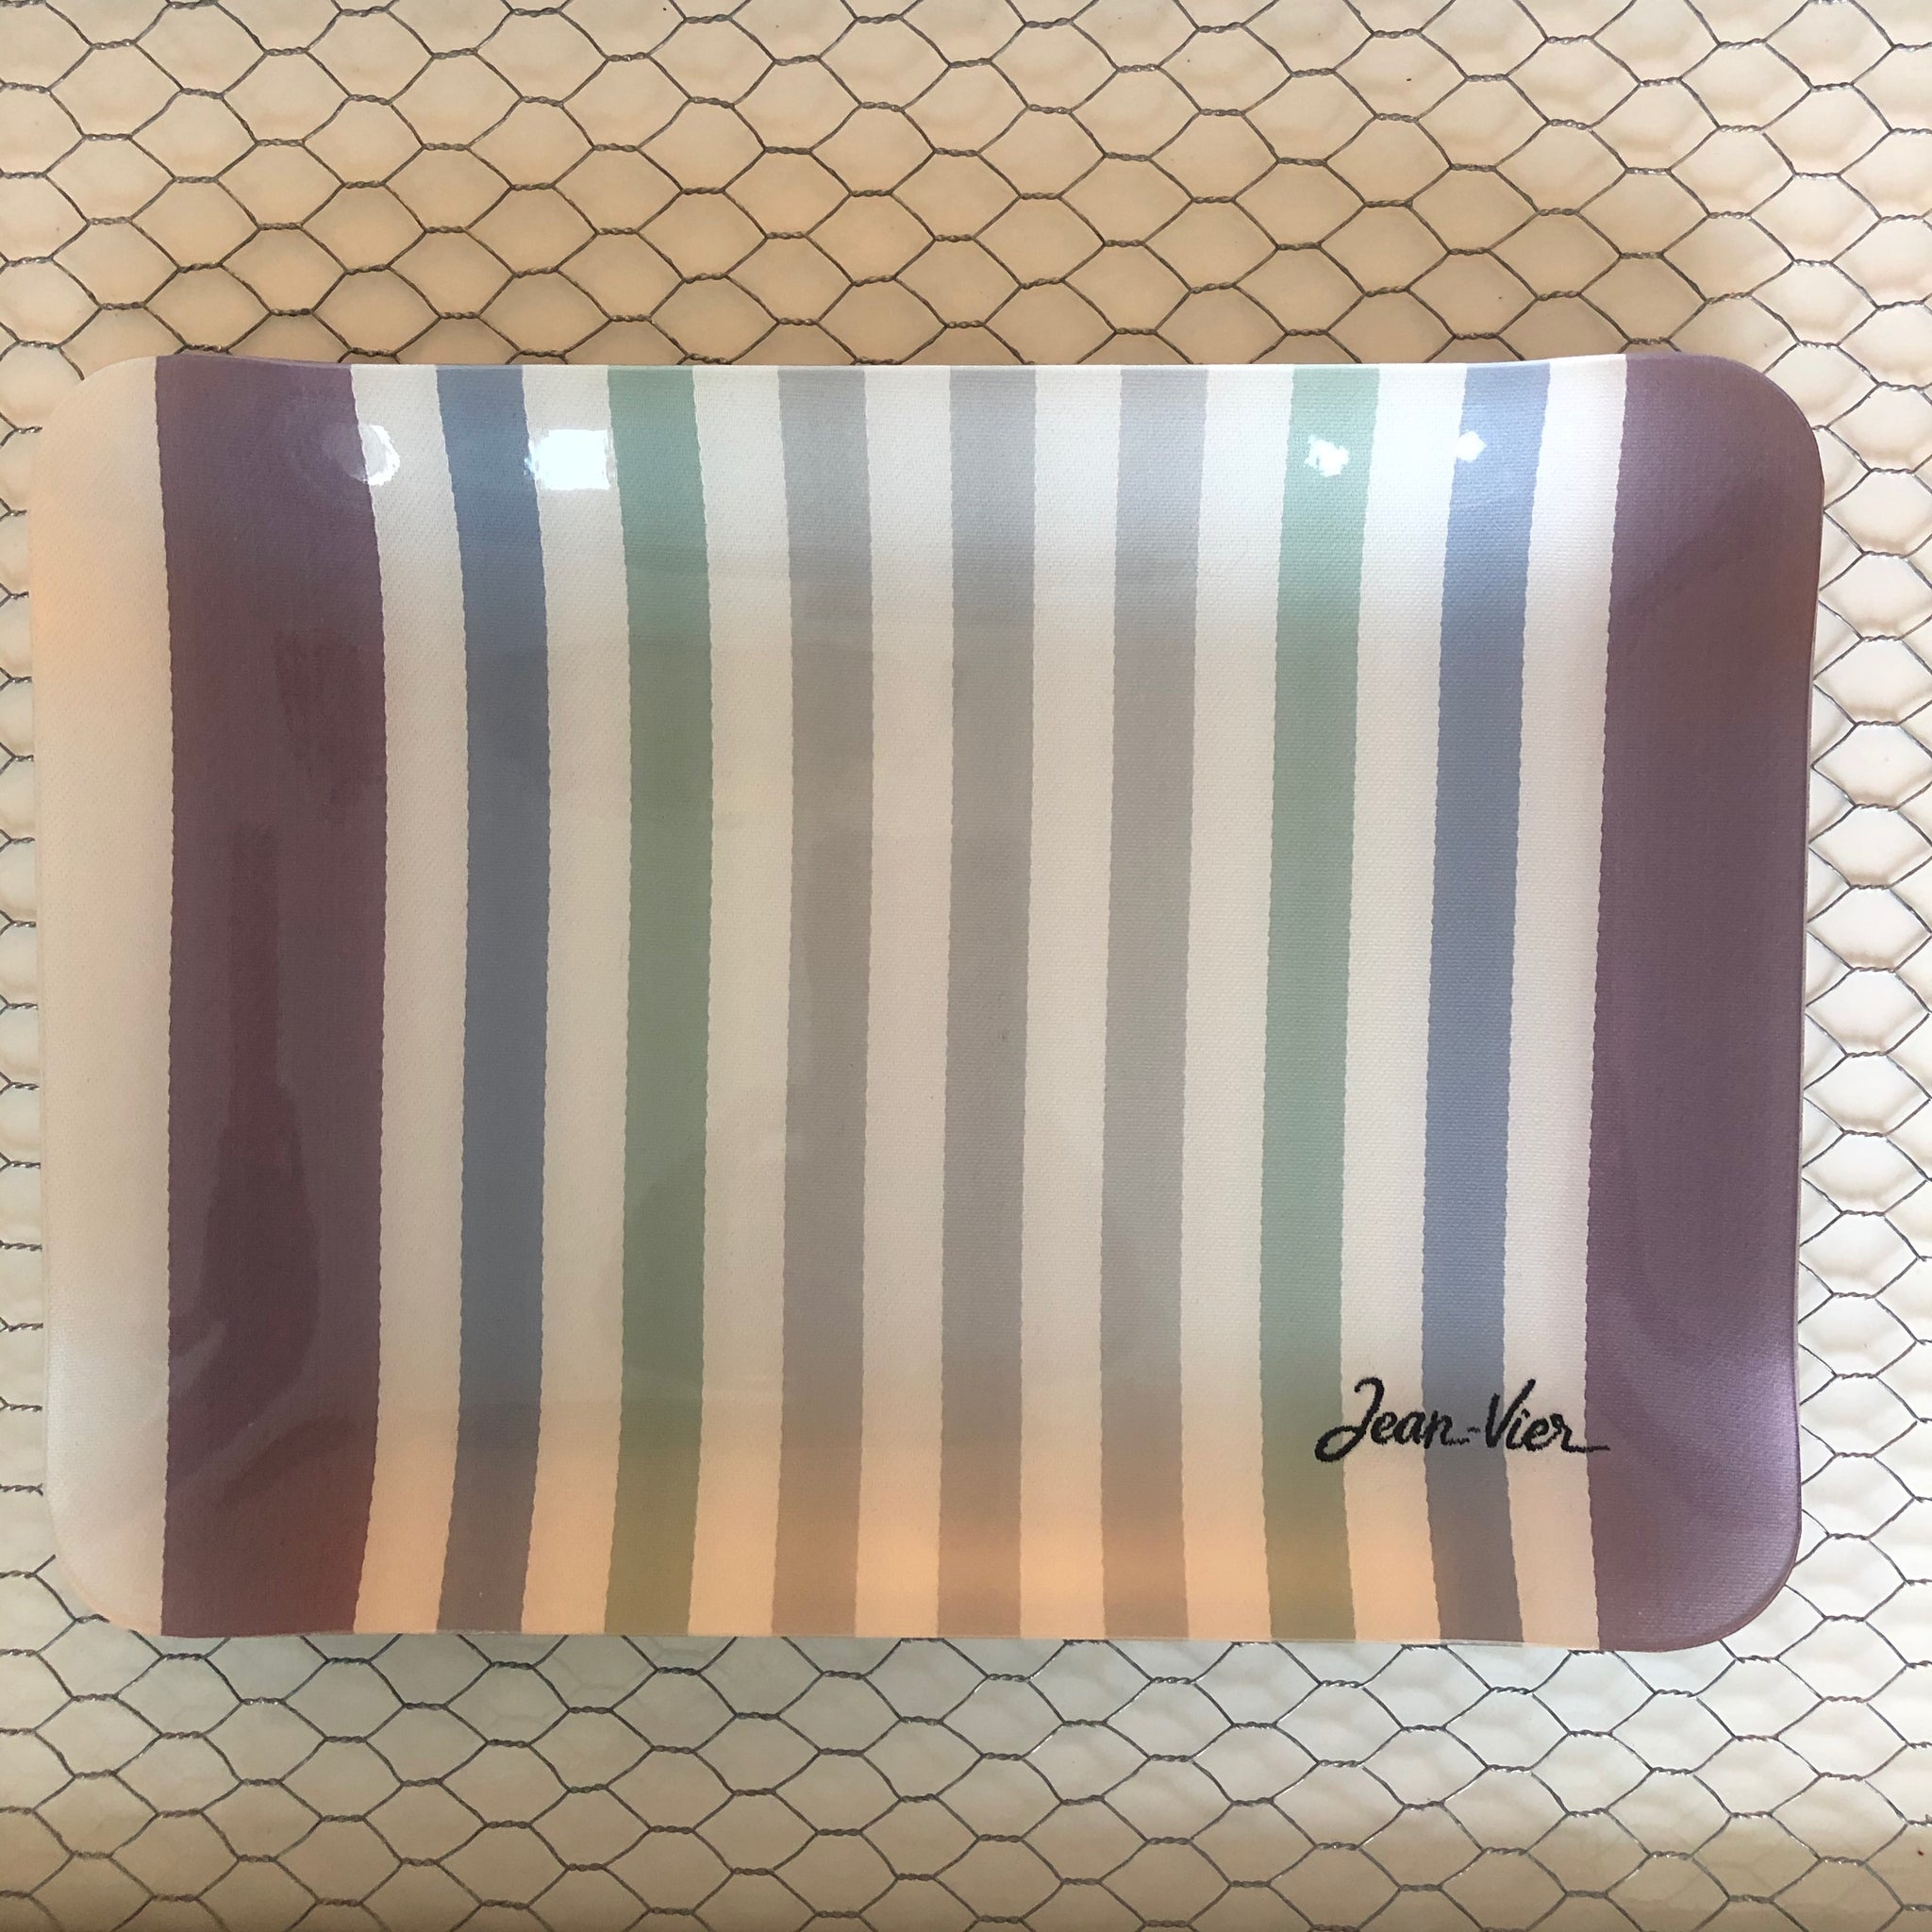 Jean-Vier Serving Tray, small, "Seaside Pastels"